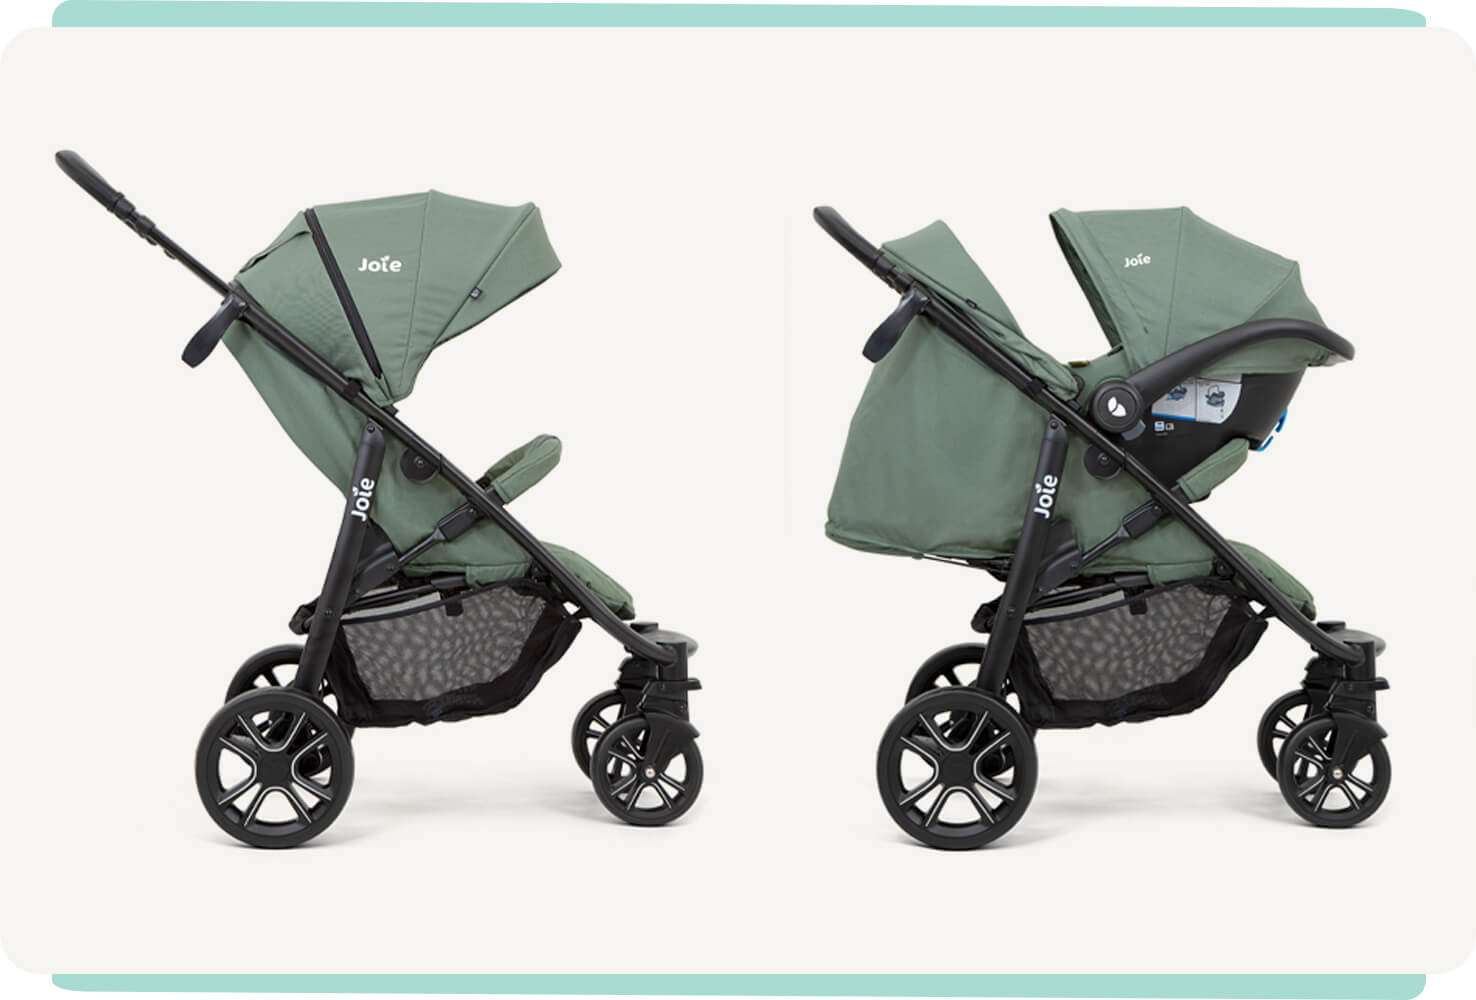 2 green litetrax 4 dlx strollers in profile showing the 2 modes of use: pushchair, infant car seat travel system.